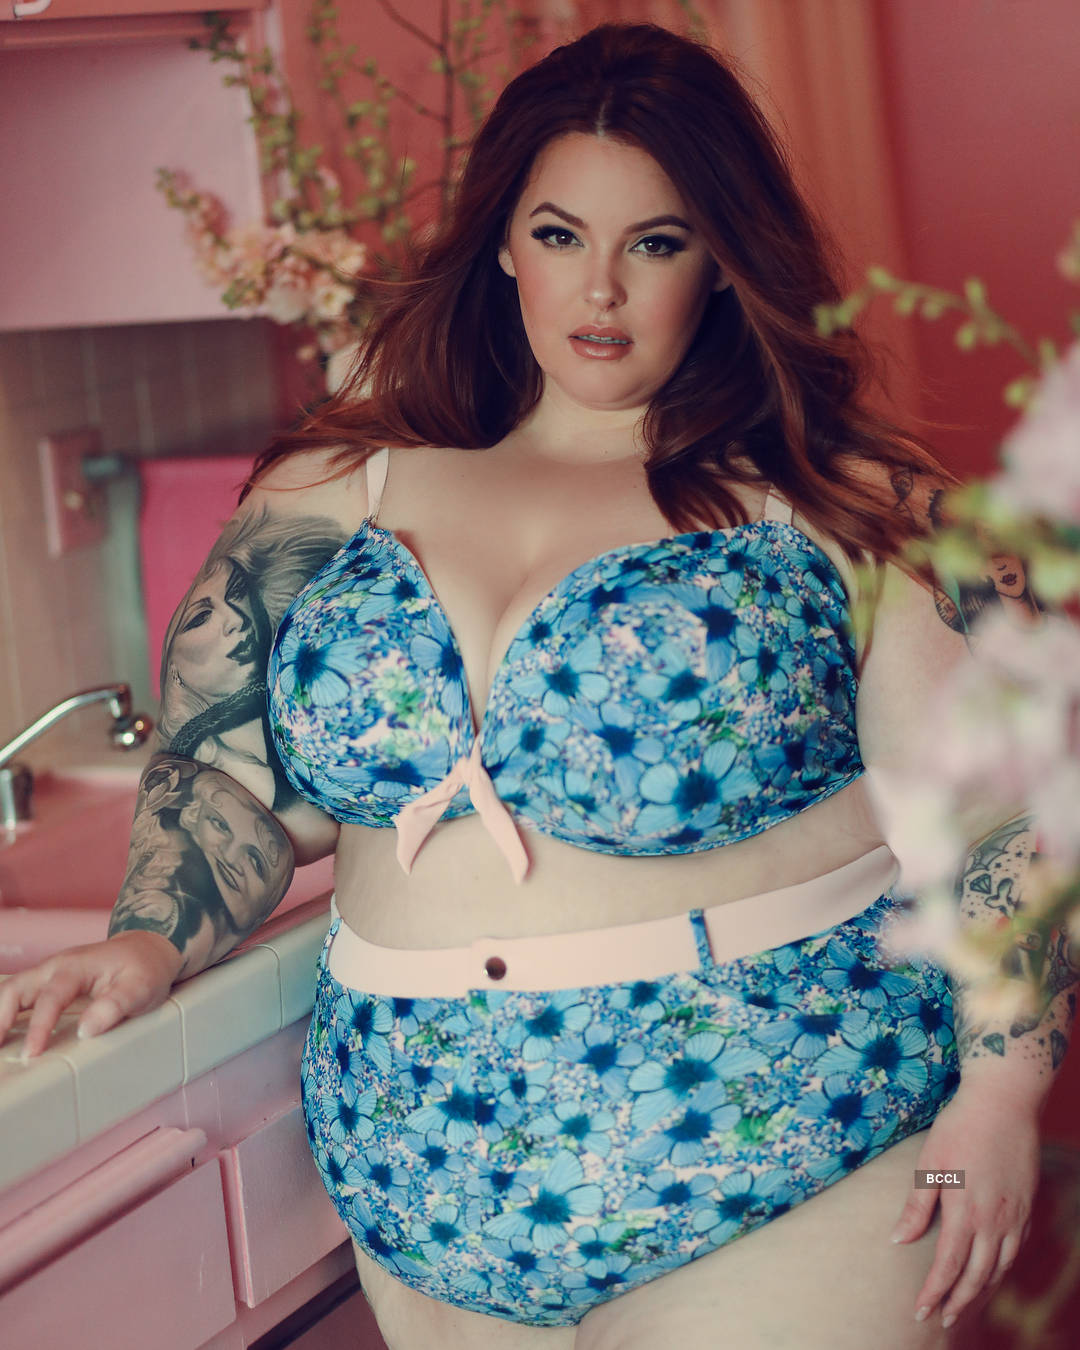 Tess Holliday: 'Never seen a fat girl in her underwear before?', Models